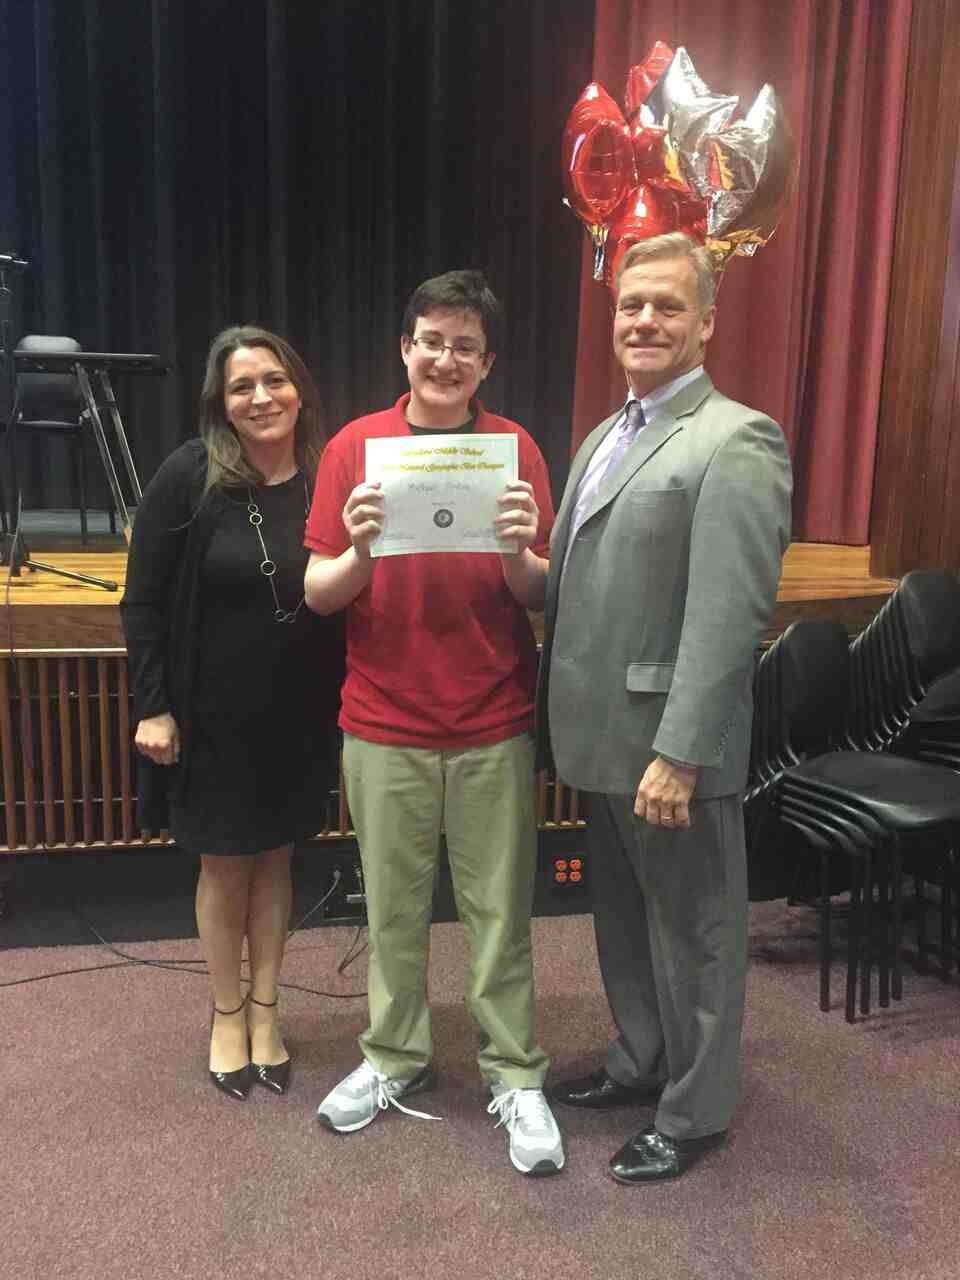 Michael Pincus (center) recently won Woodland’s National Geographic Bee, district officials said.